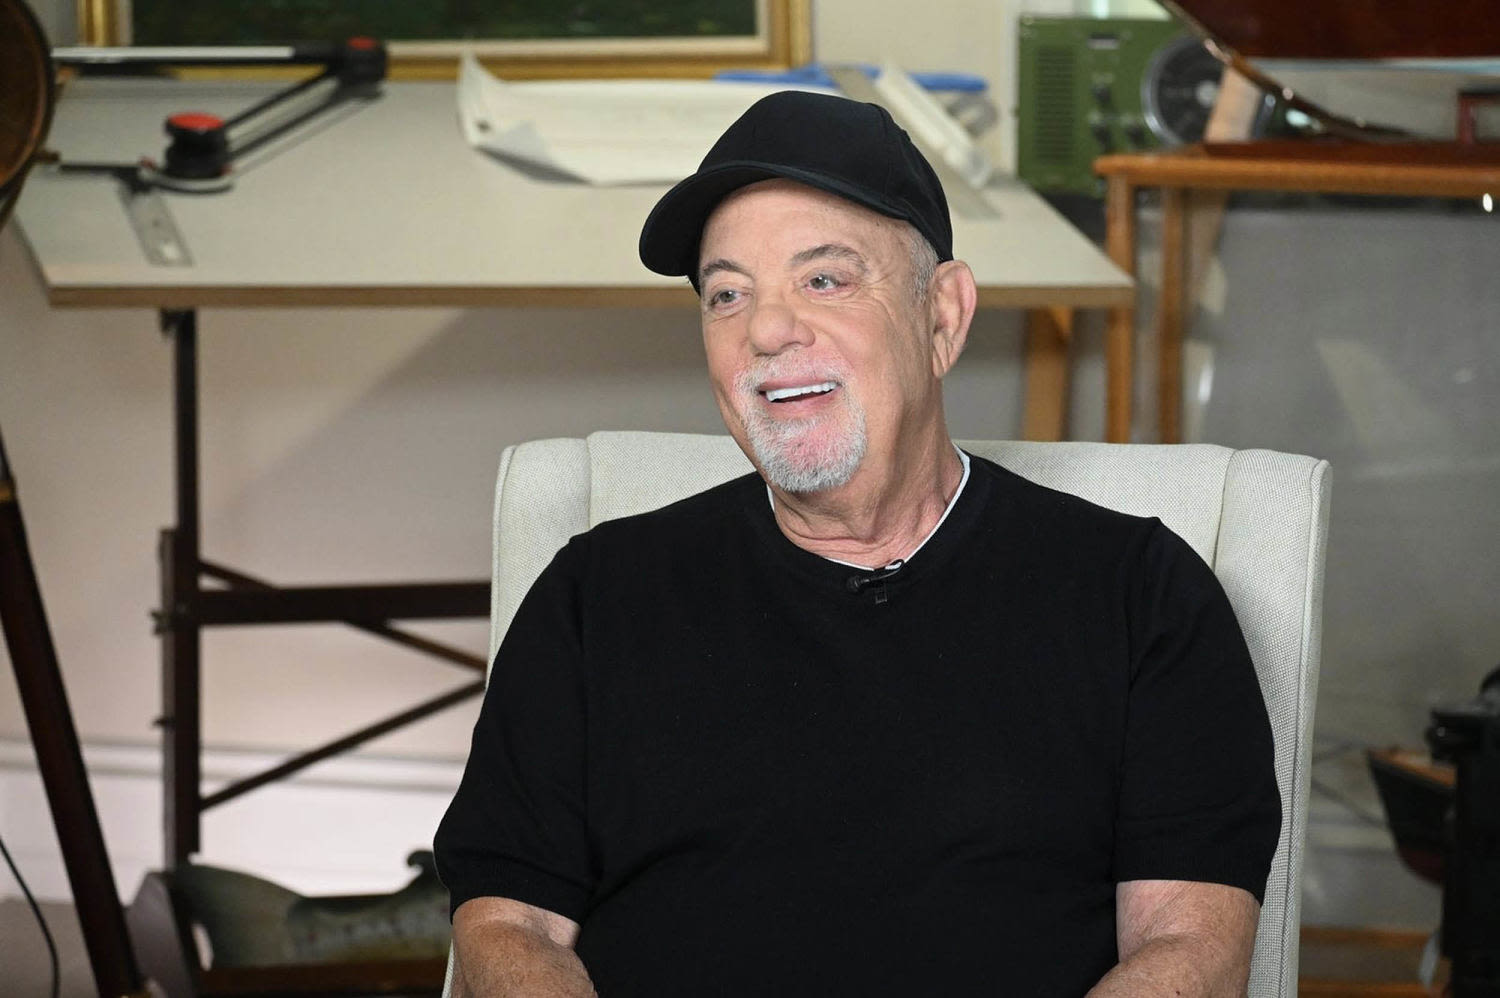 Billy Joel says he's not ready to retire after his MSG residency. Here's what he plans to do